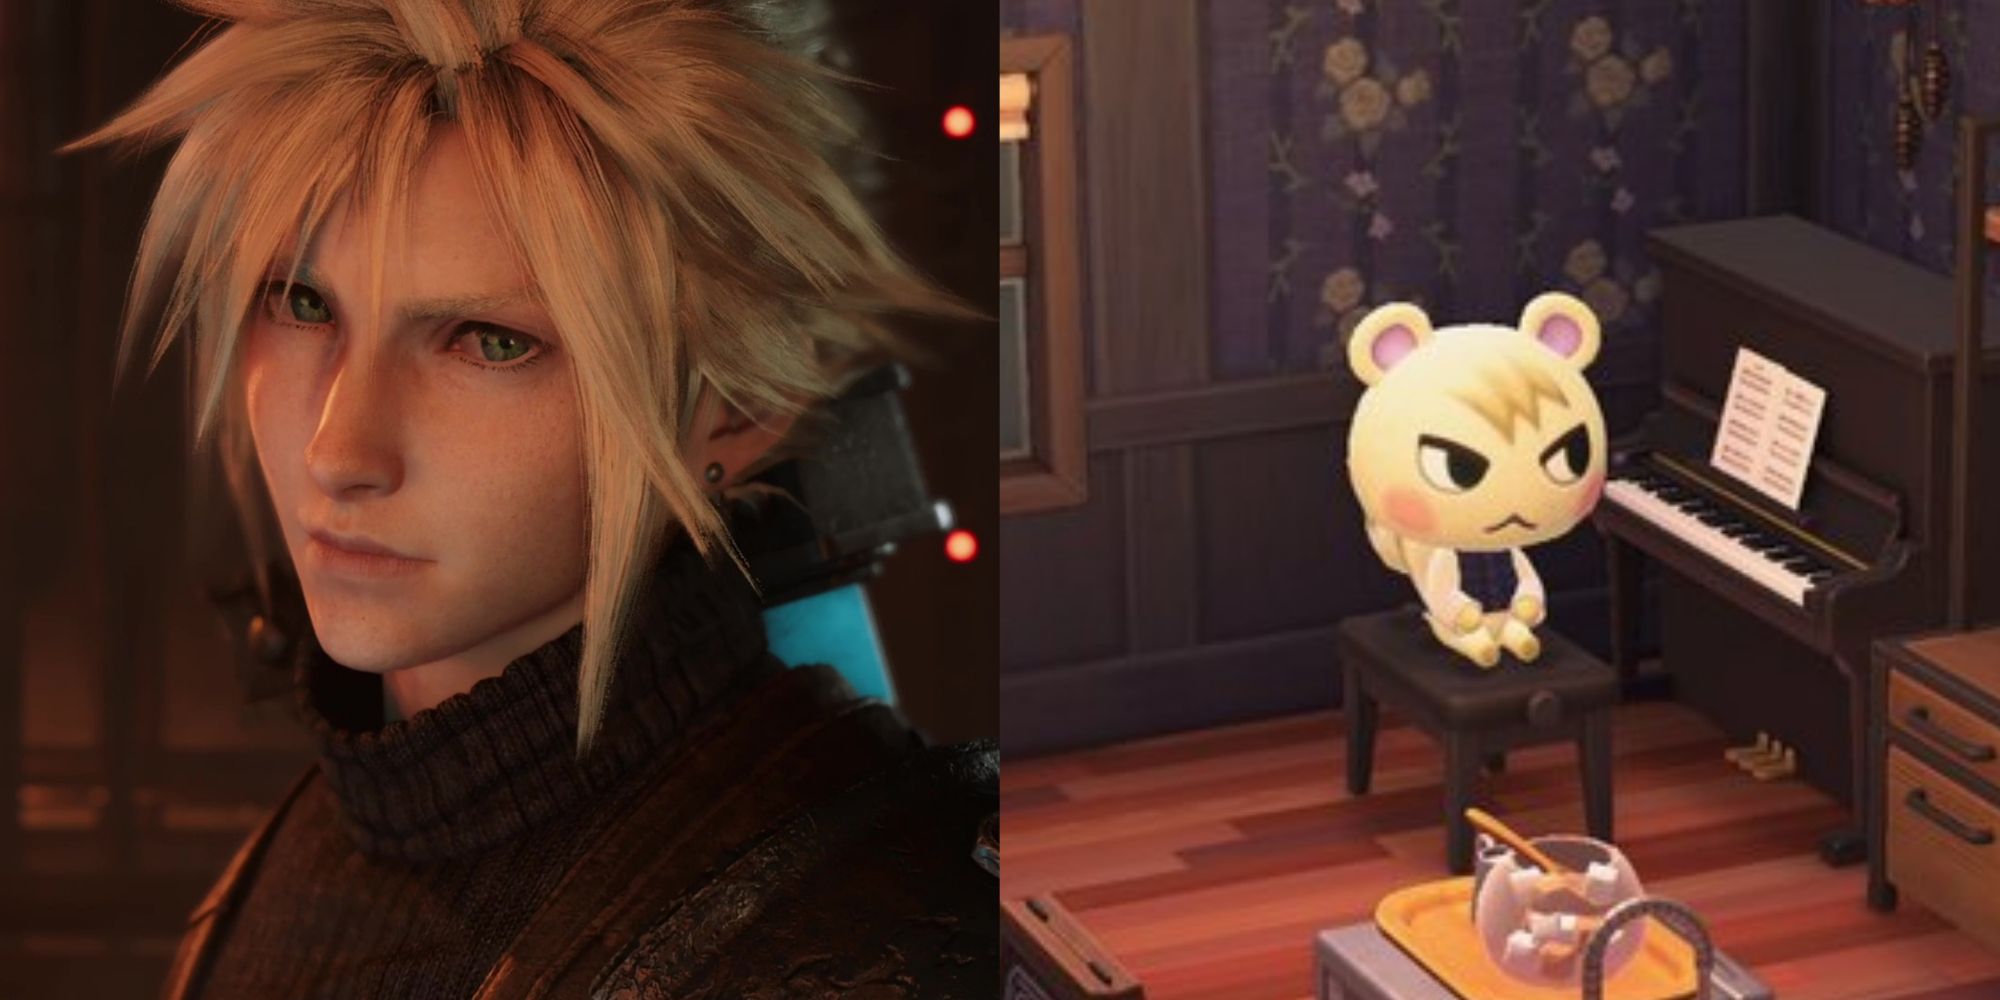 Split image screenshots of a close-up of Cloud Strife in Final Fantasy 7 Remake and Marshal sat on a stool next to a piano in Animal Crossing: New Horizons.